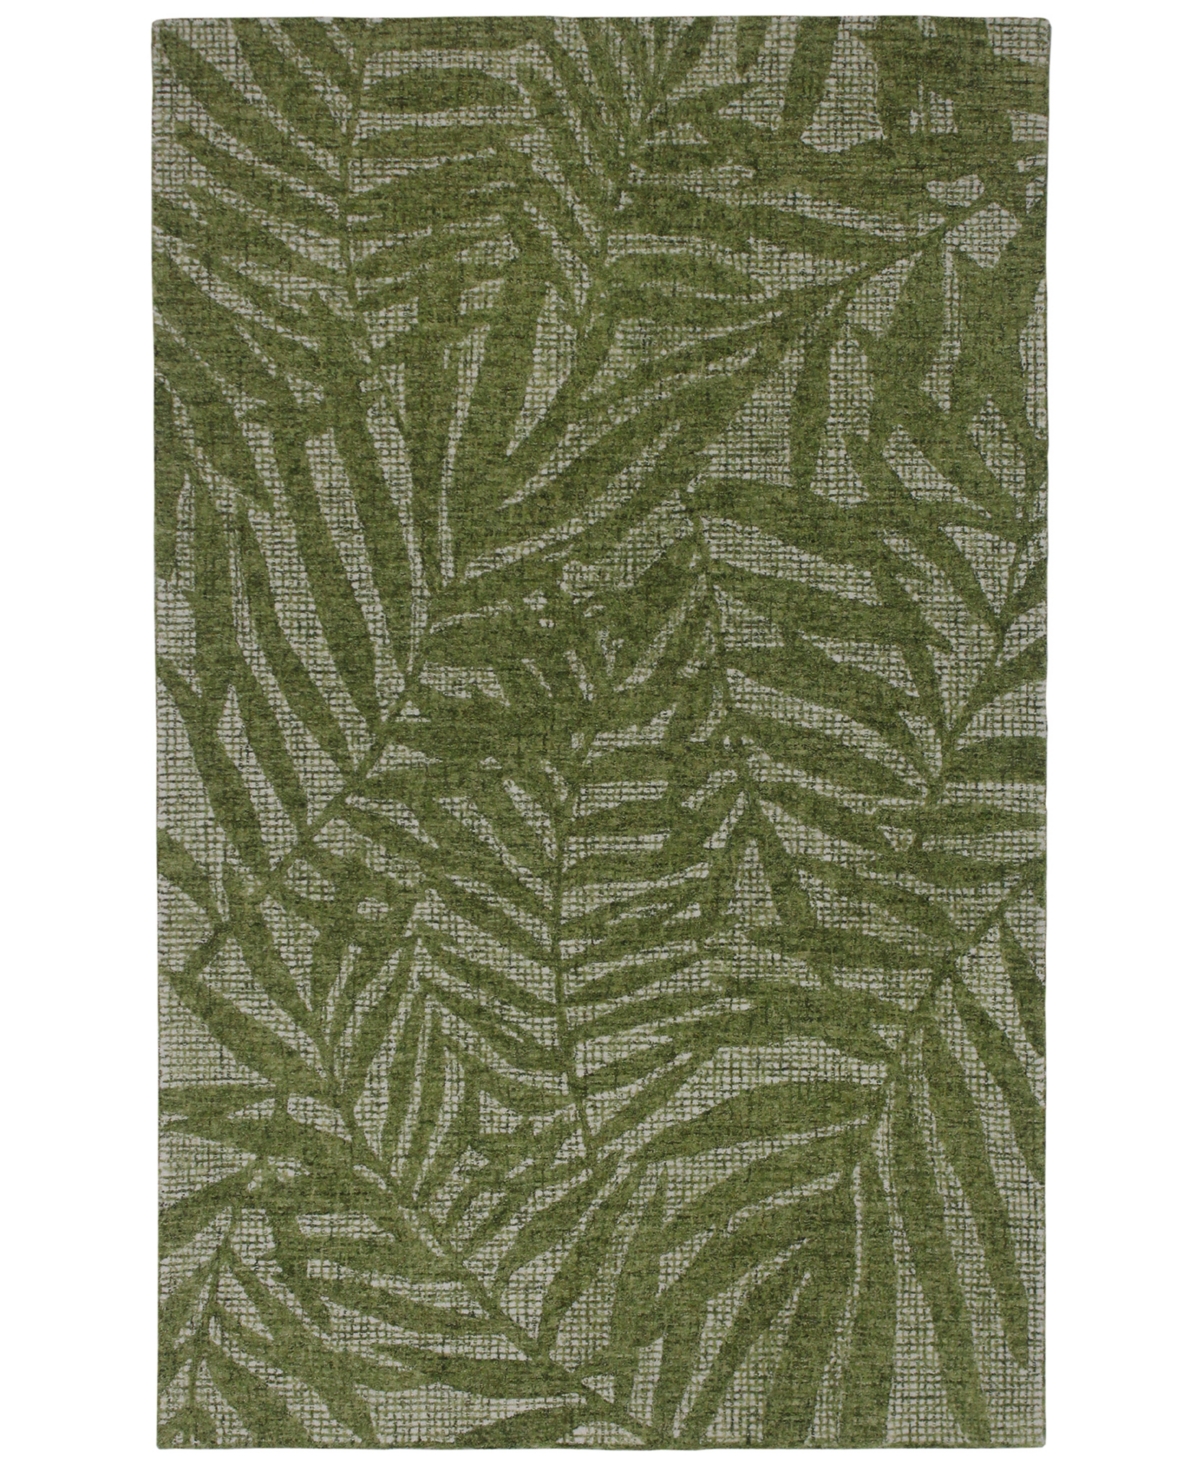 Liora Manne' Savannah 9500 Olive Branches 5' x 7'6in Area Rug - Green